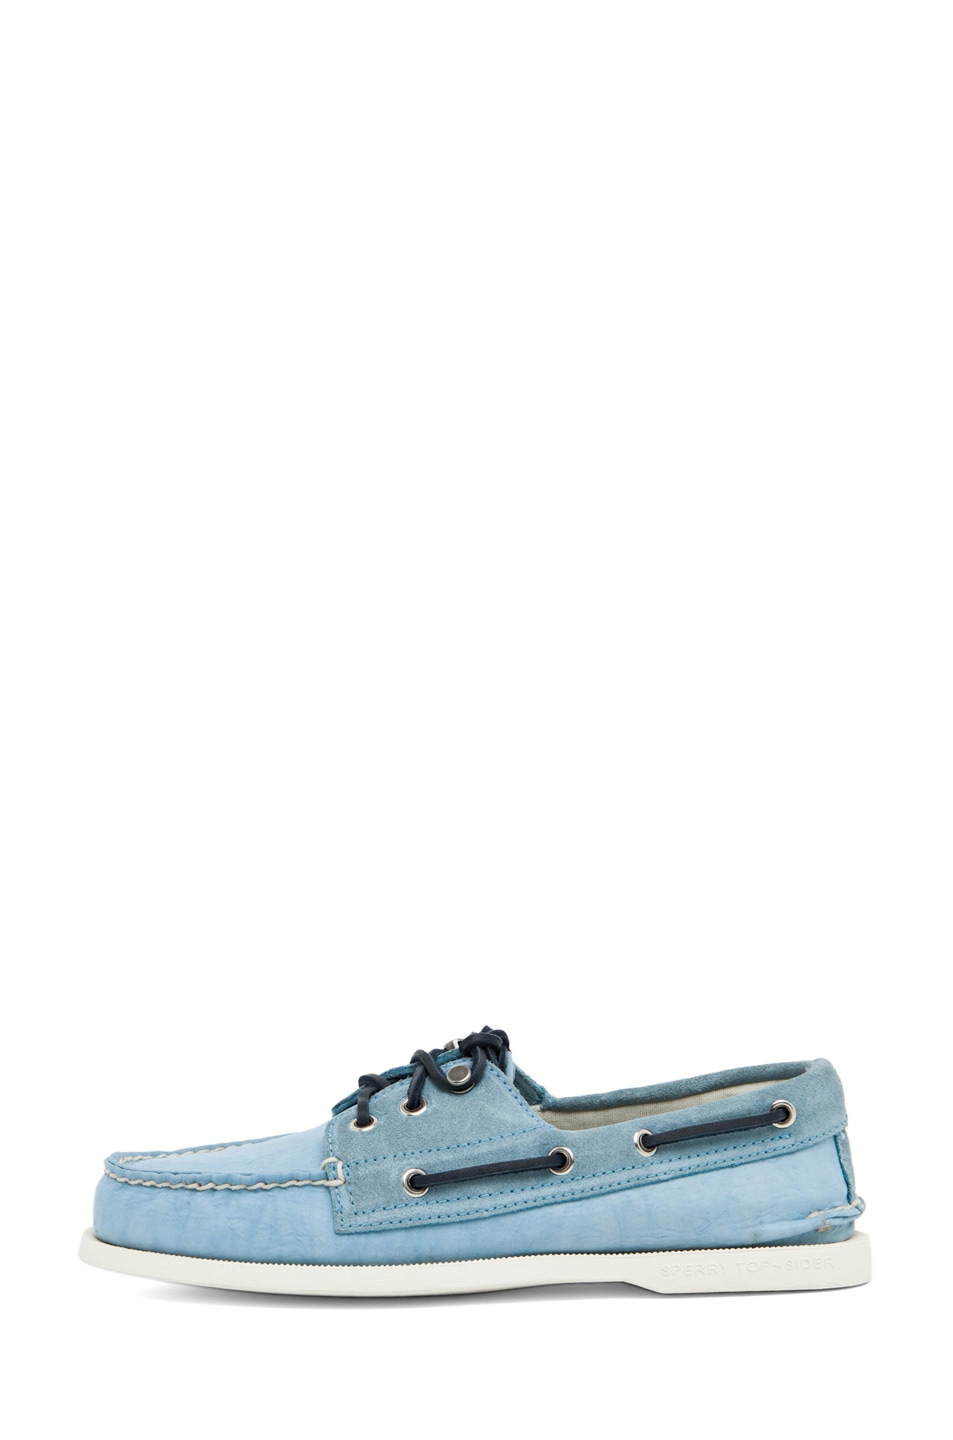 Image 1 of Band of Outsiders x Sperry Top-Sider 3 Eye Boat Shoe in Blue Nylon & Suede